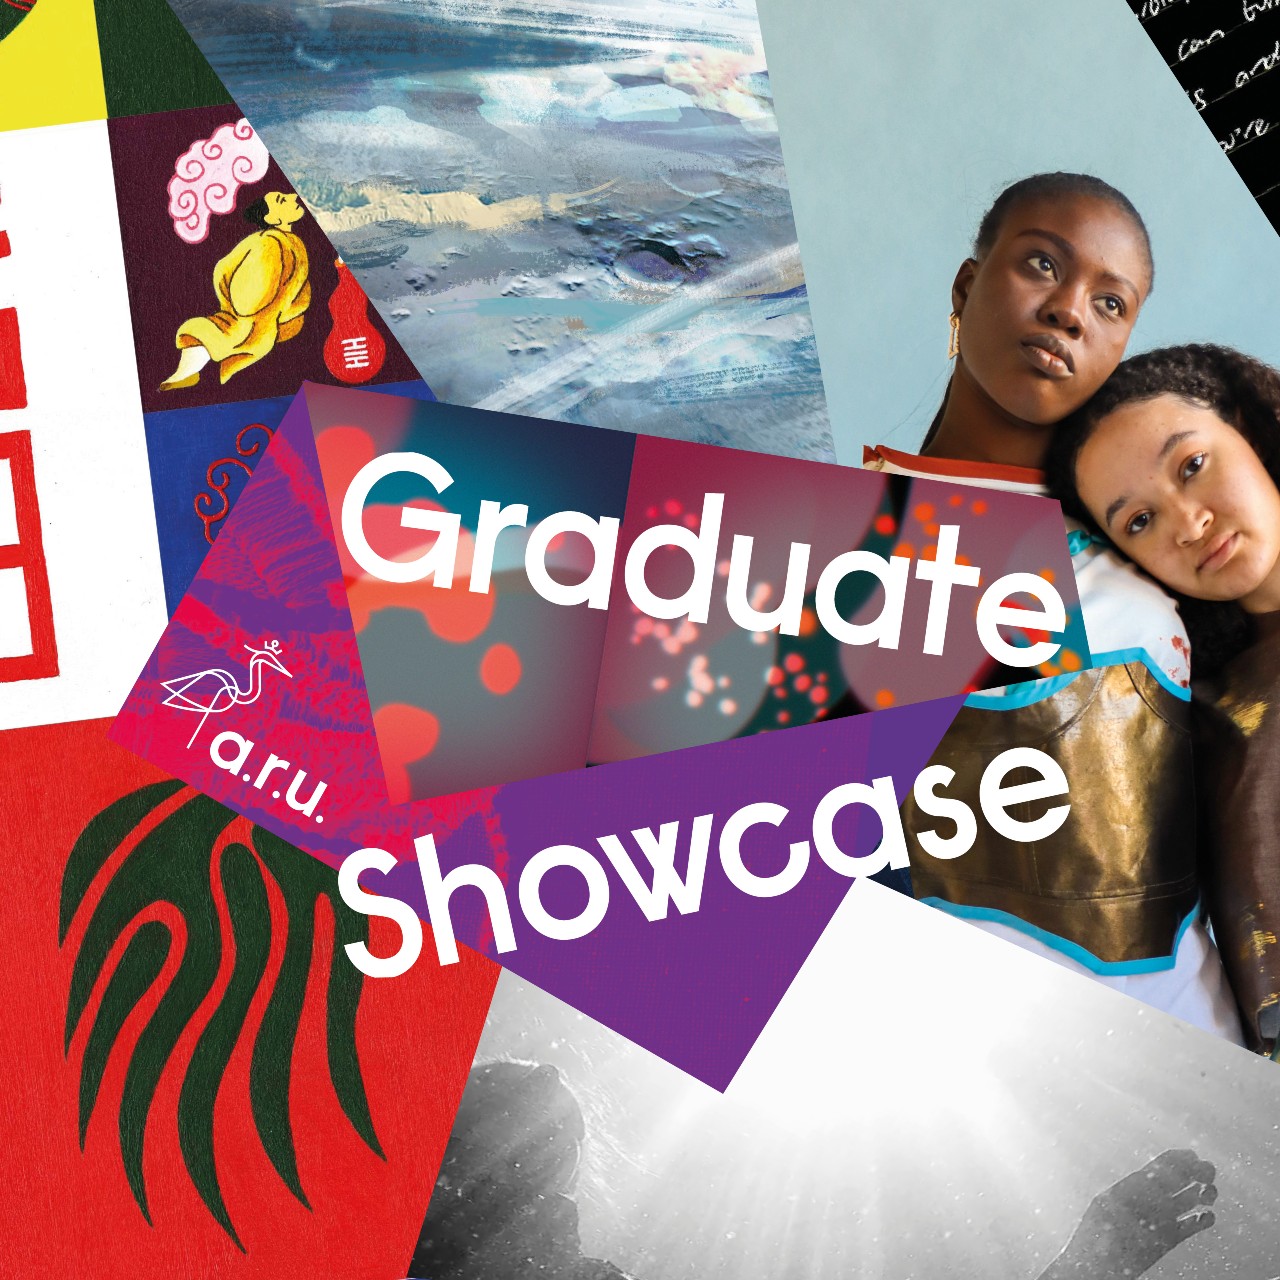 Anglia Ruskin Graduate Showcase collage of images also featuring two people